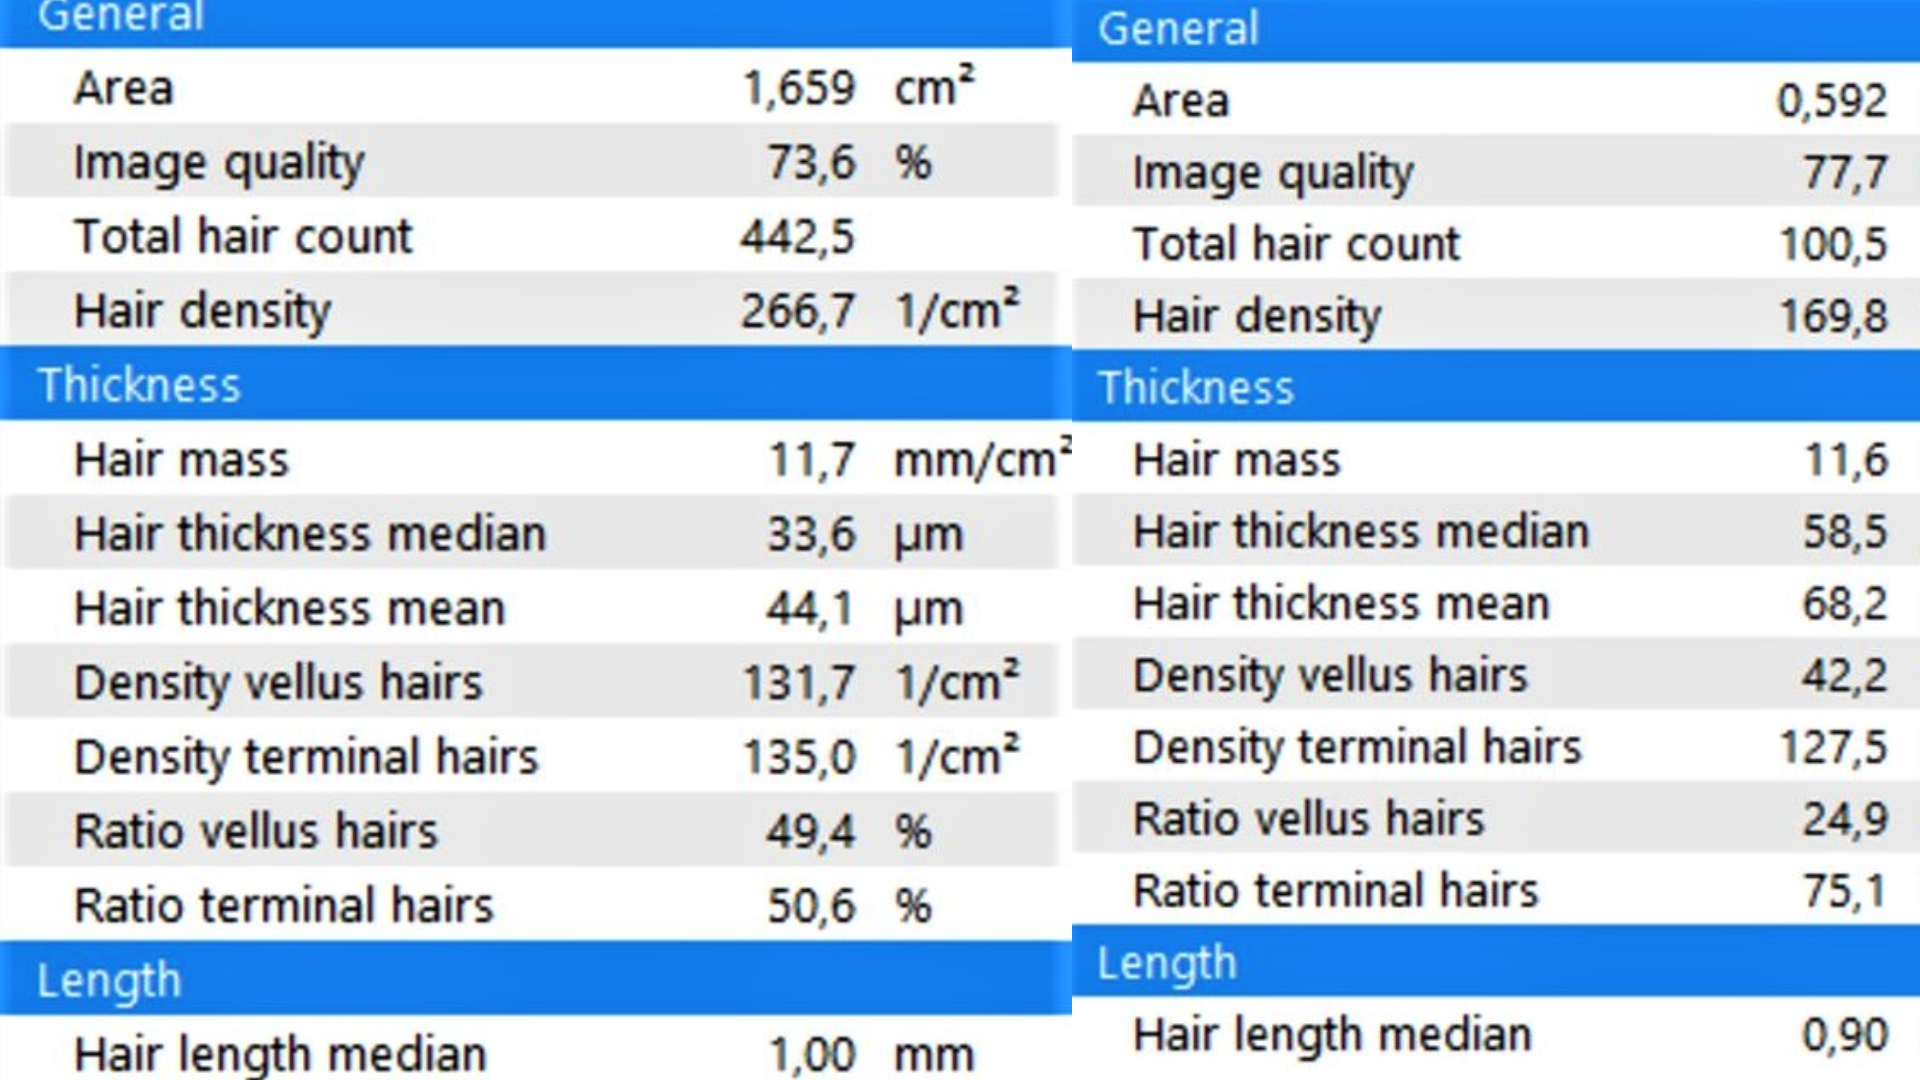 Parameters of the digital trichoscope on alopecia.